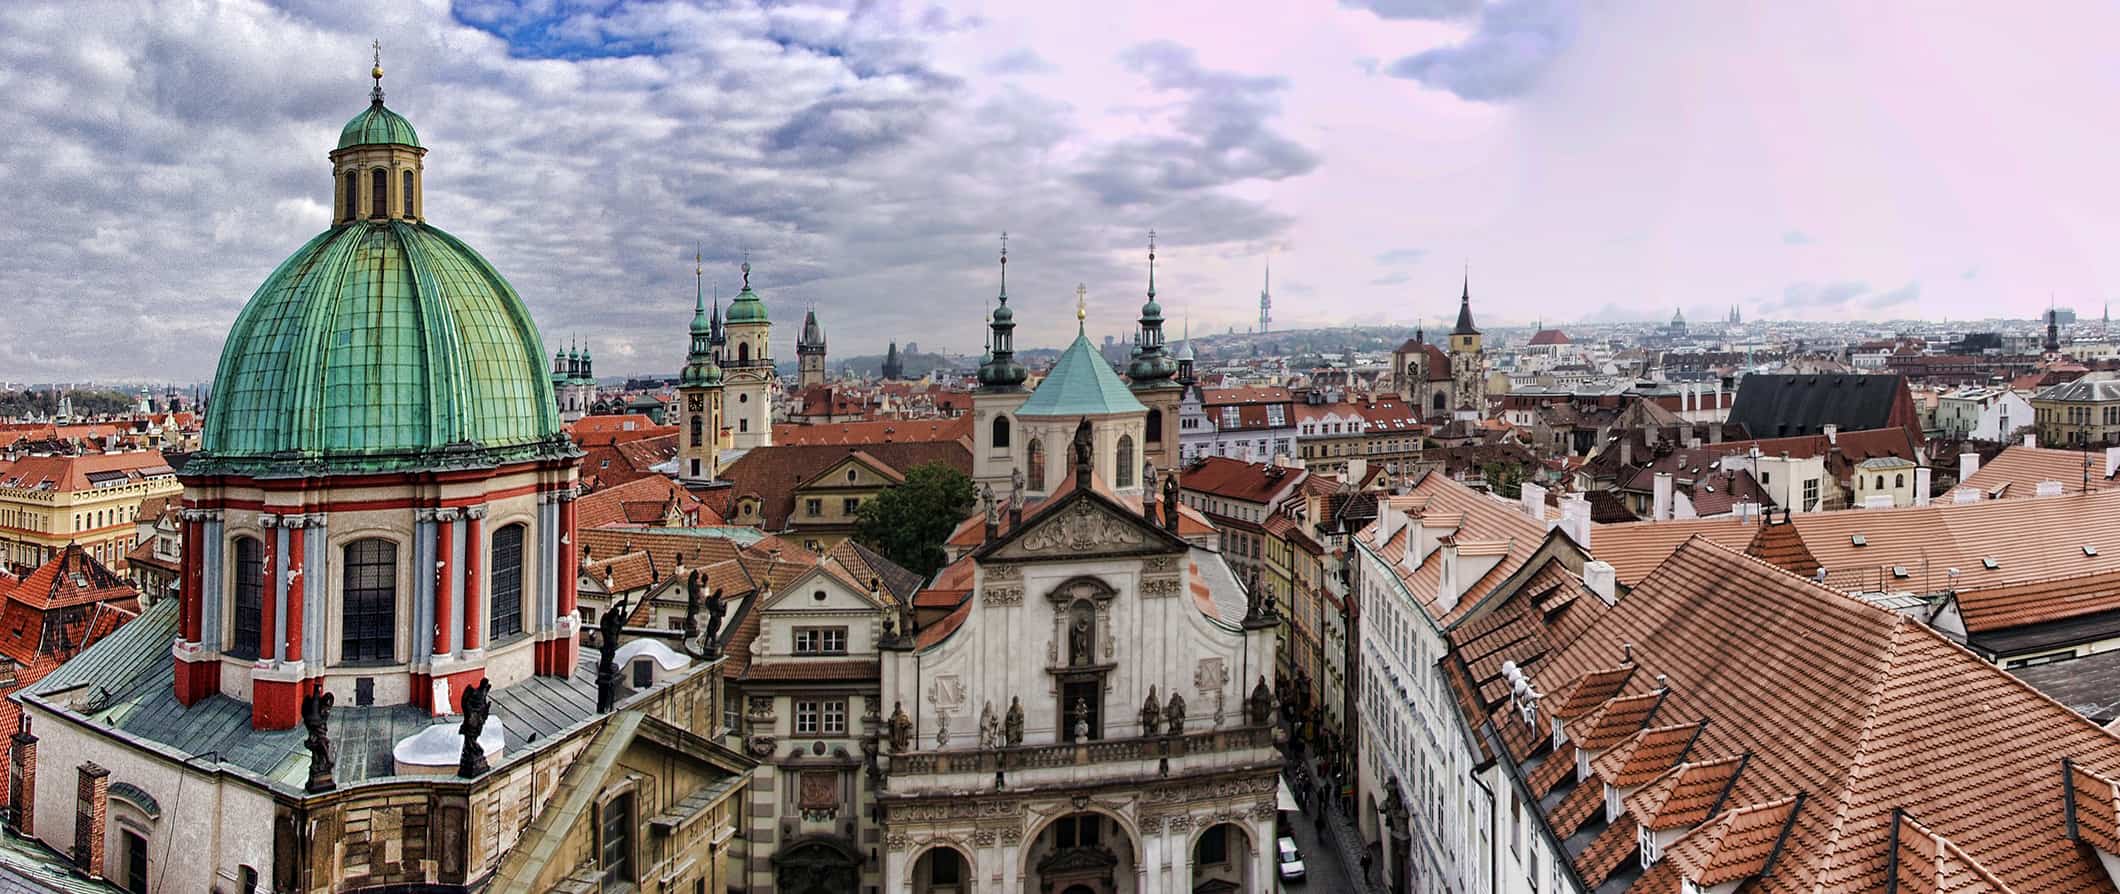 The historic city of Prague with its classic stunning architecture